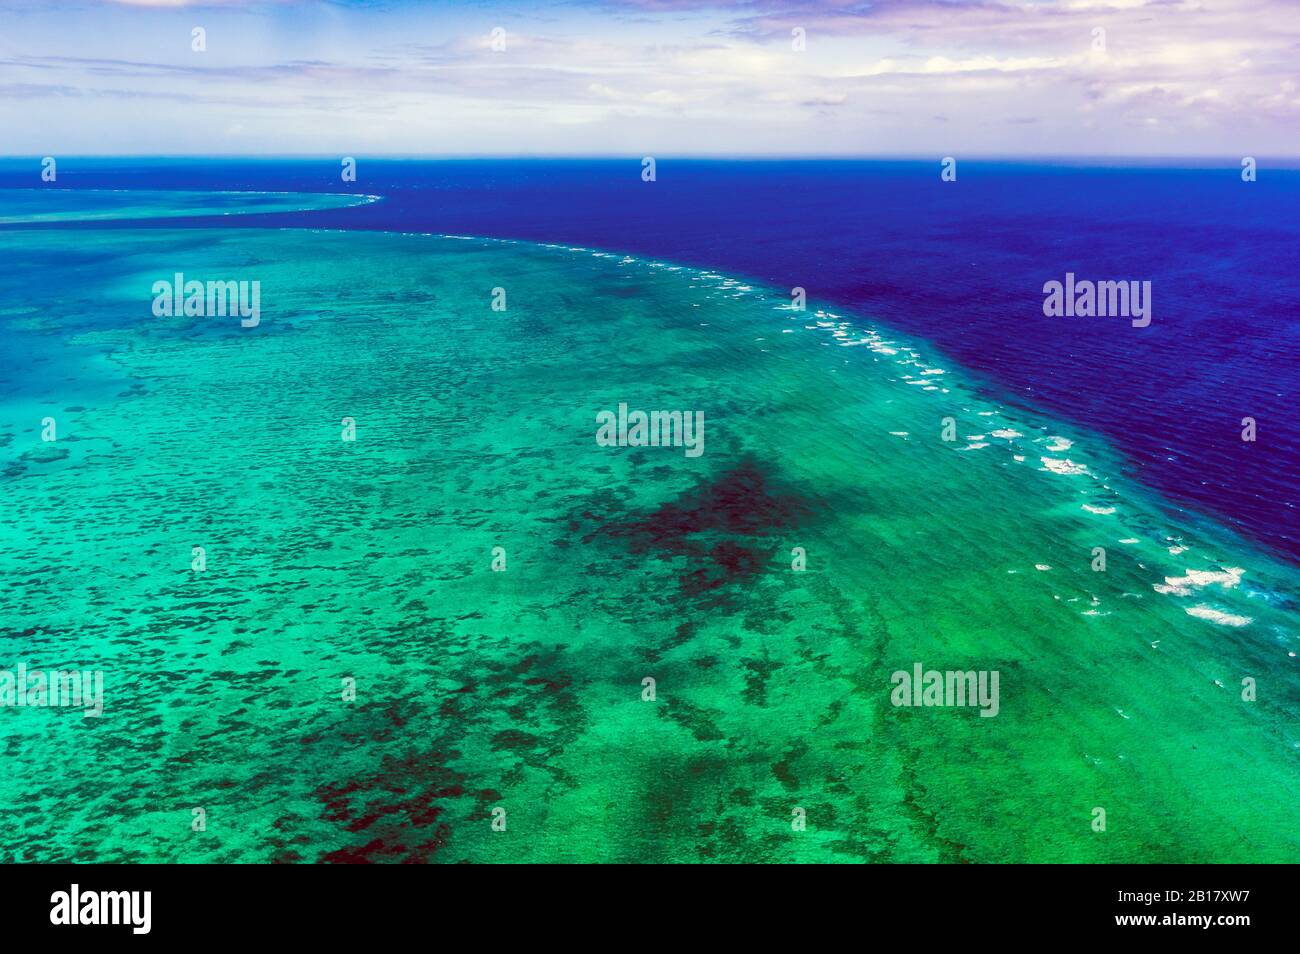 Australia, Queensland, Aerial view of Great Barrier Reef Stock Photo